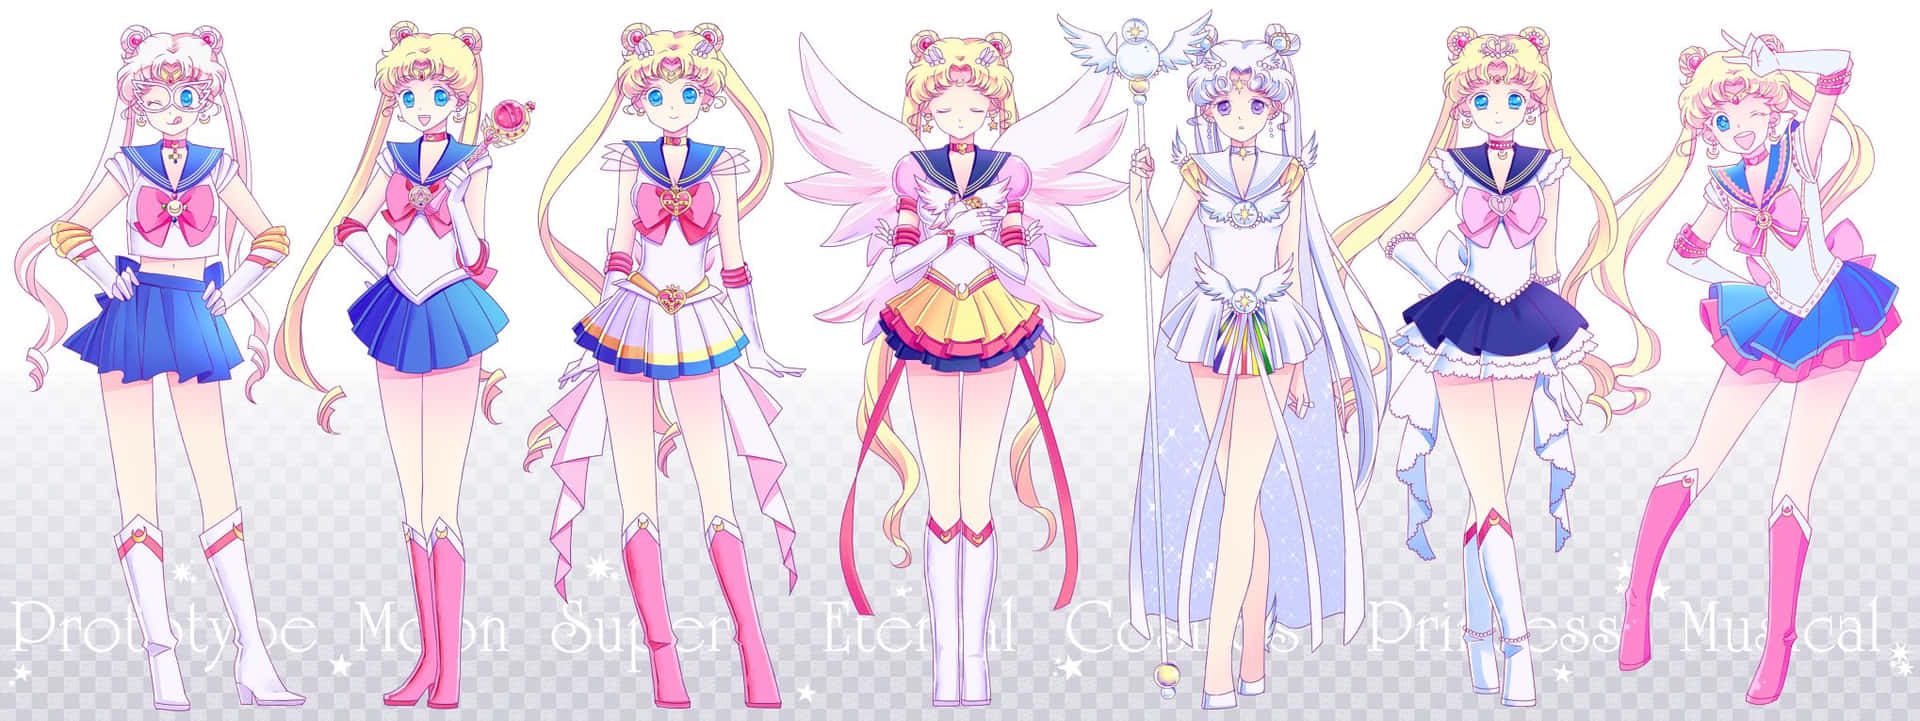 Pastel Sailor Moon Outfits Anime Girl Wallpaper